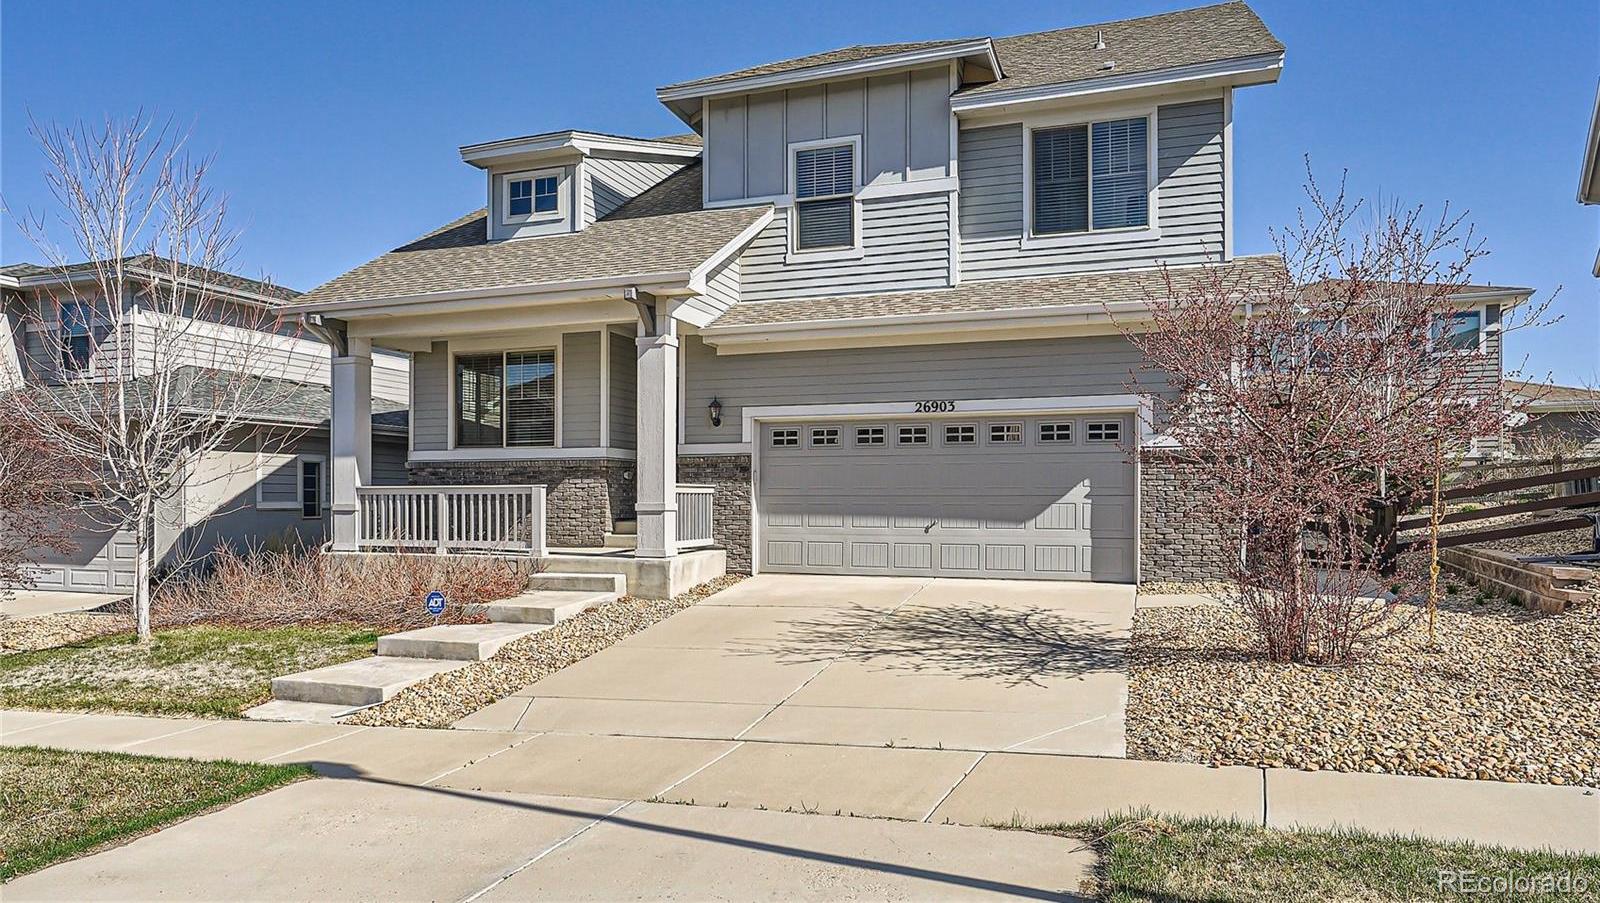 Photo one of 26903 E Easter Pl Aurora CO 80016 | MLS 8273216